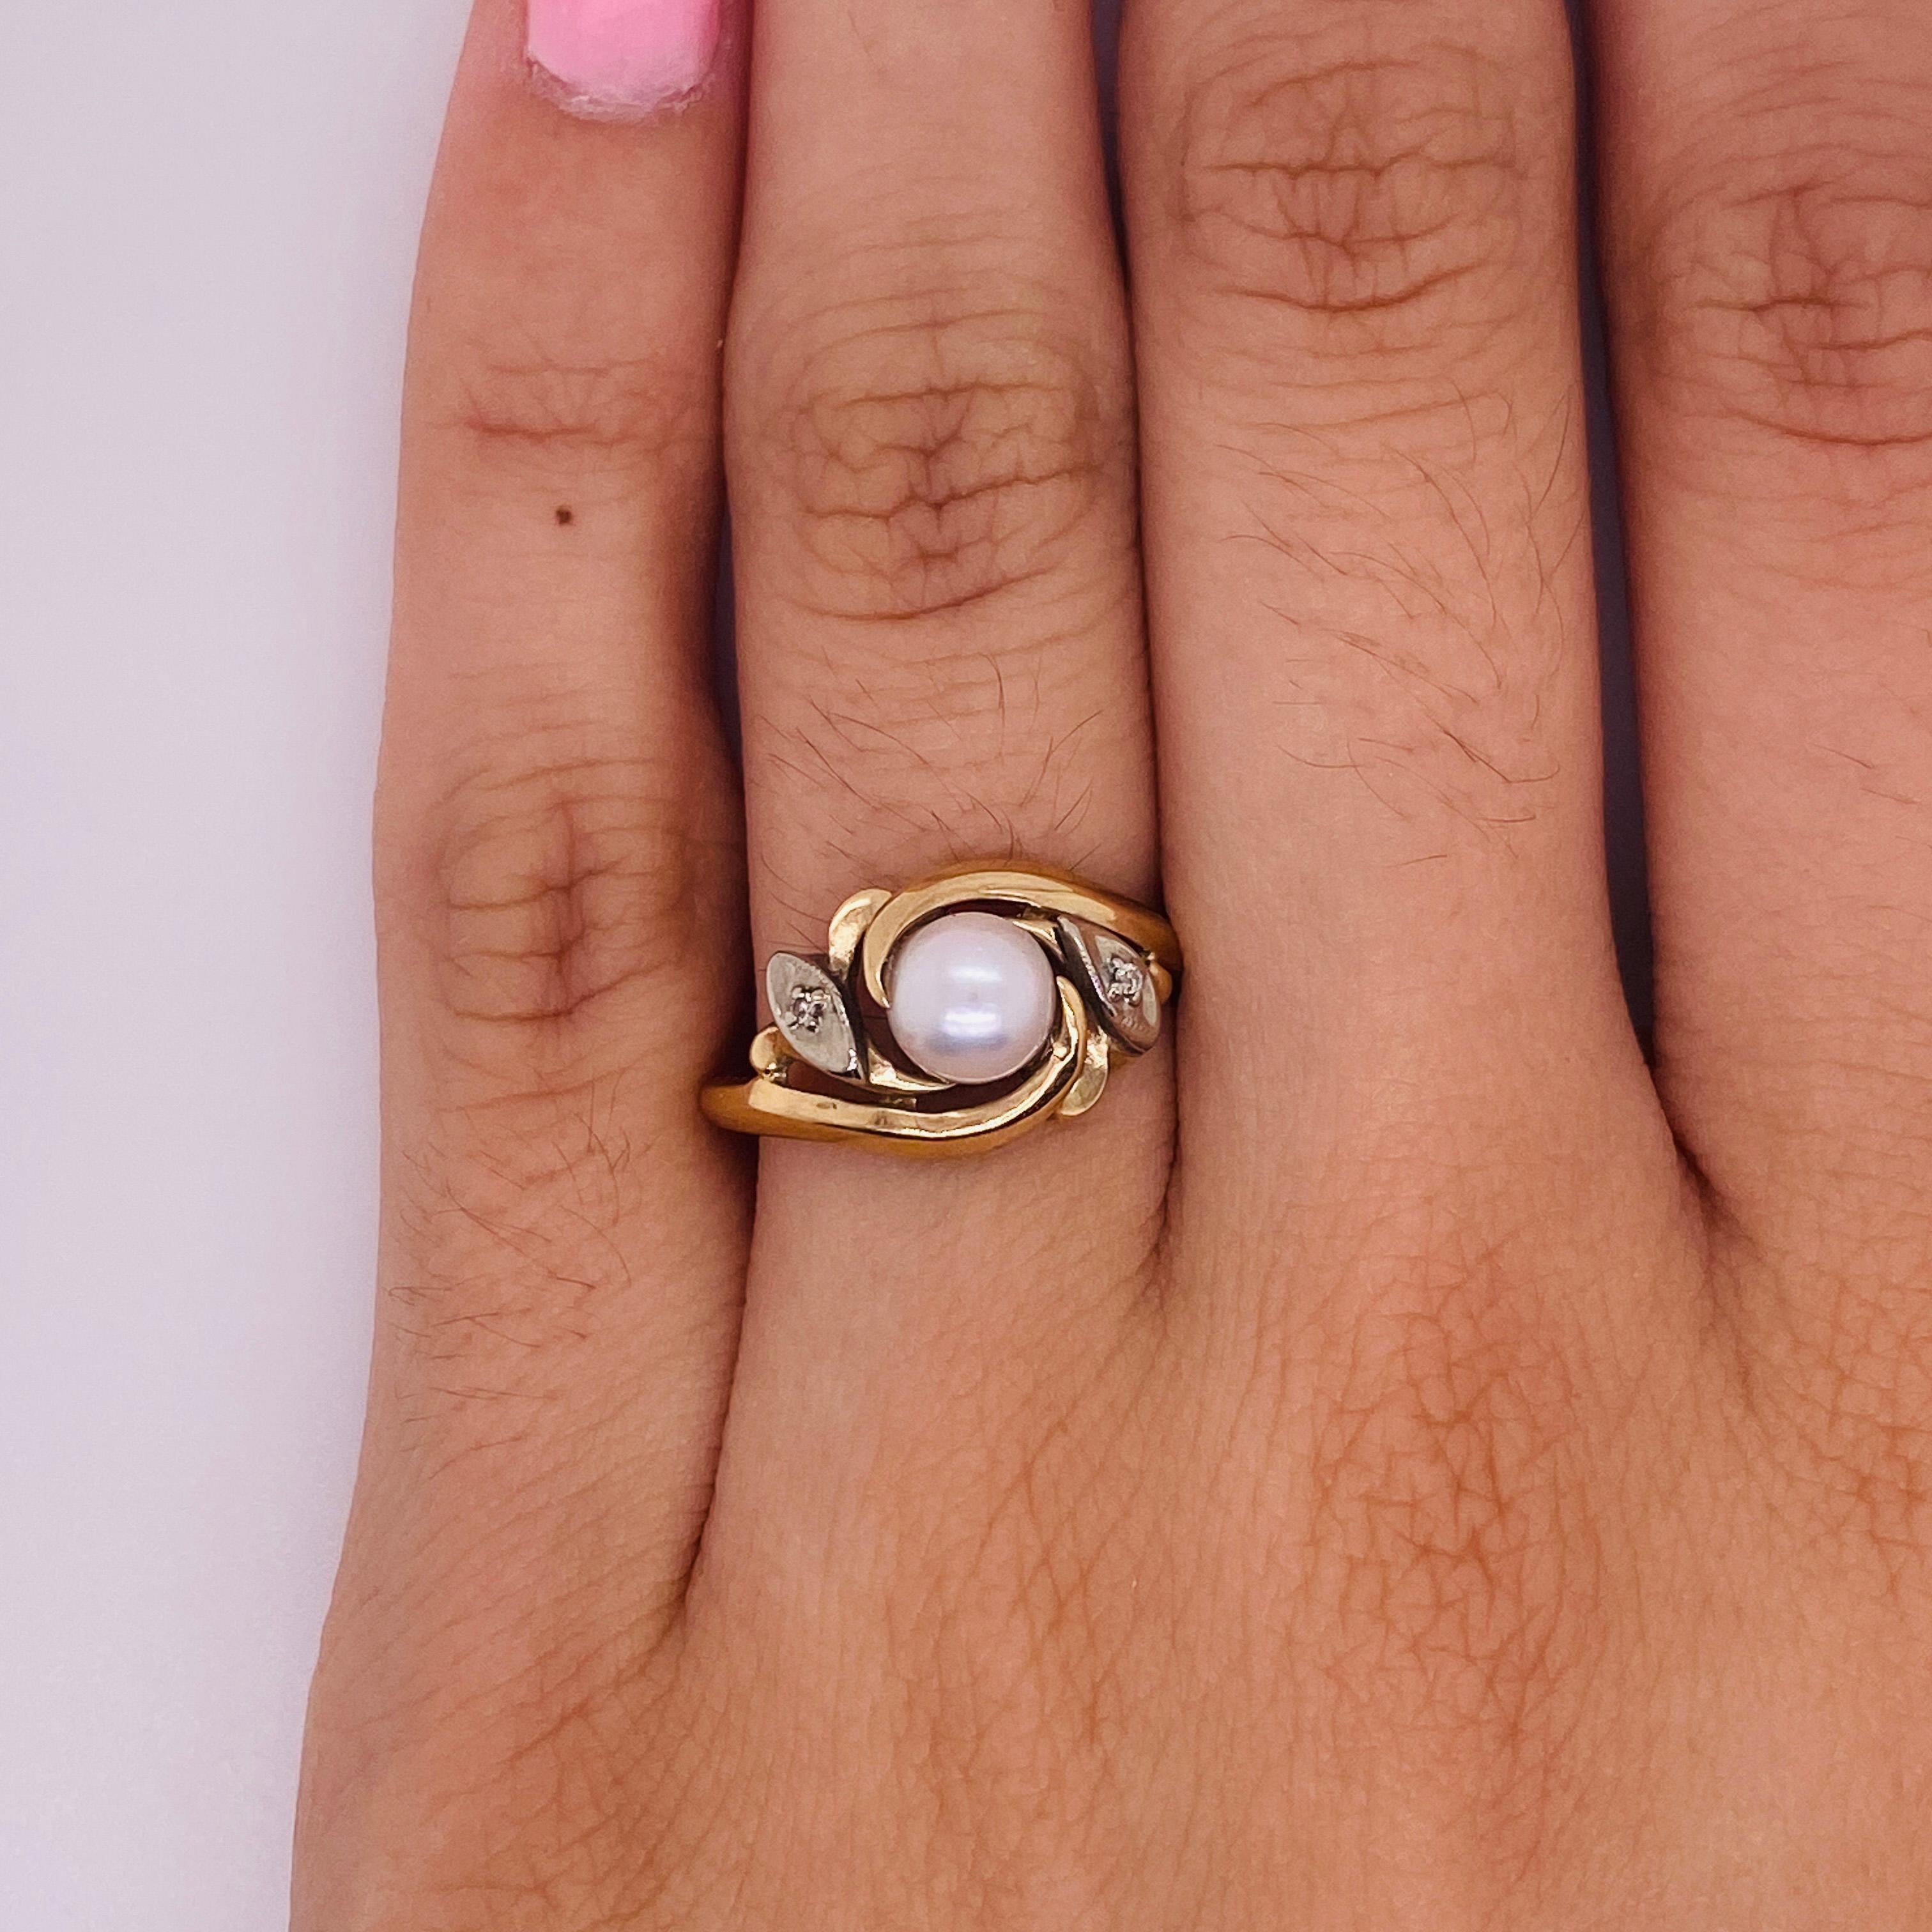 Pearls are one of June's birthstones! Honor a June loved one with this wonderful and comfortable ring, perfect for a graduation, birthday, or important milestone! The bright luster of the Japanese akoya cultured pearl catches any hint of light and